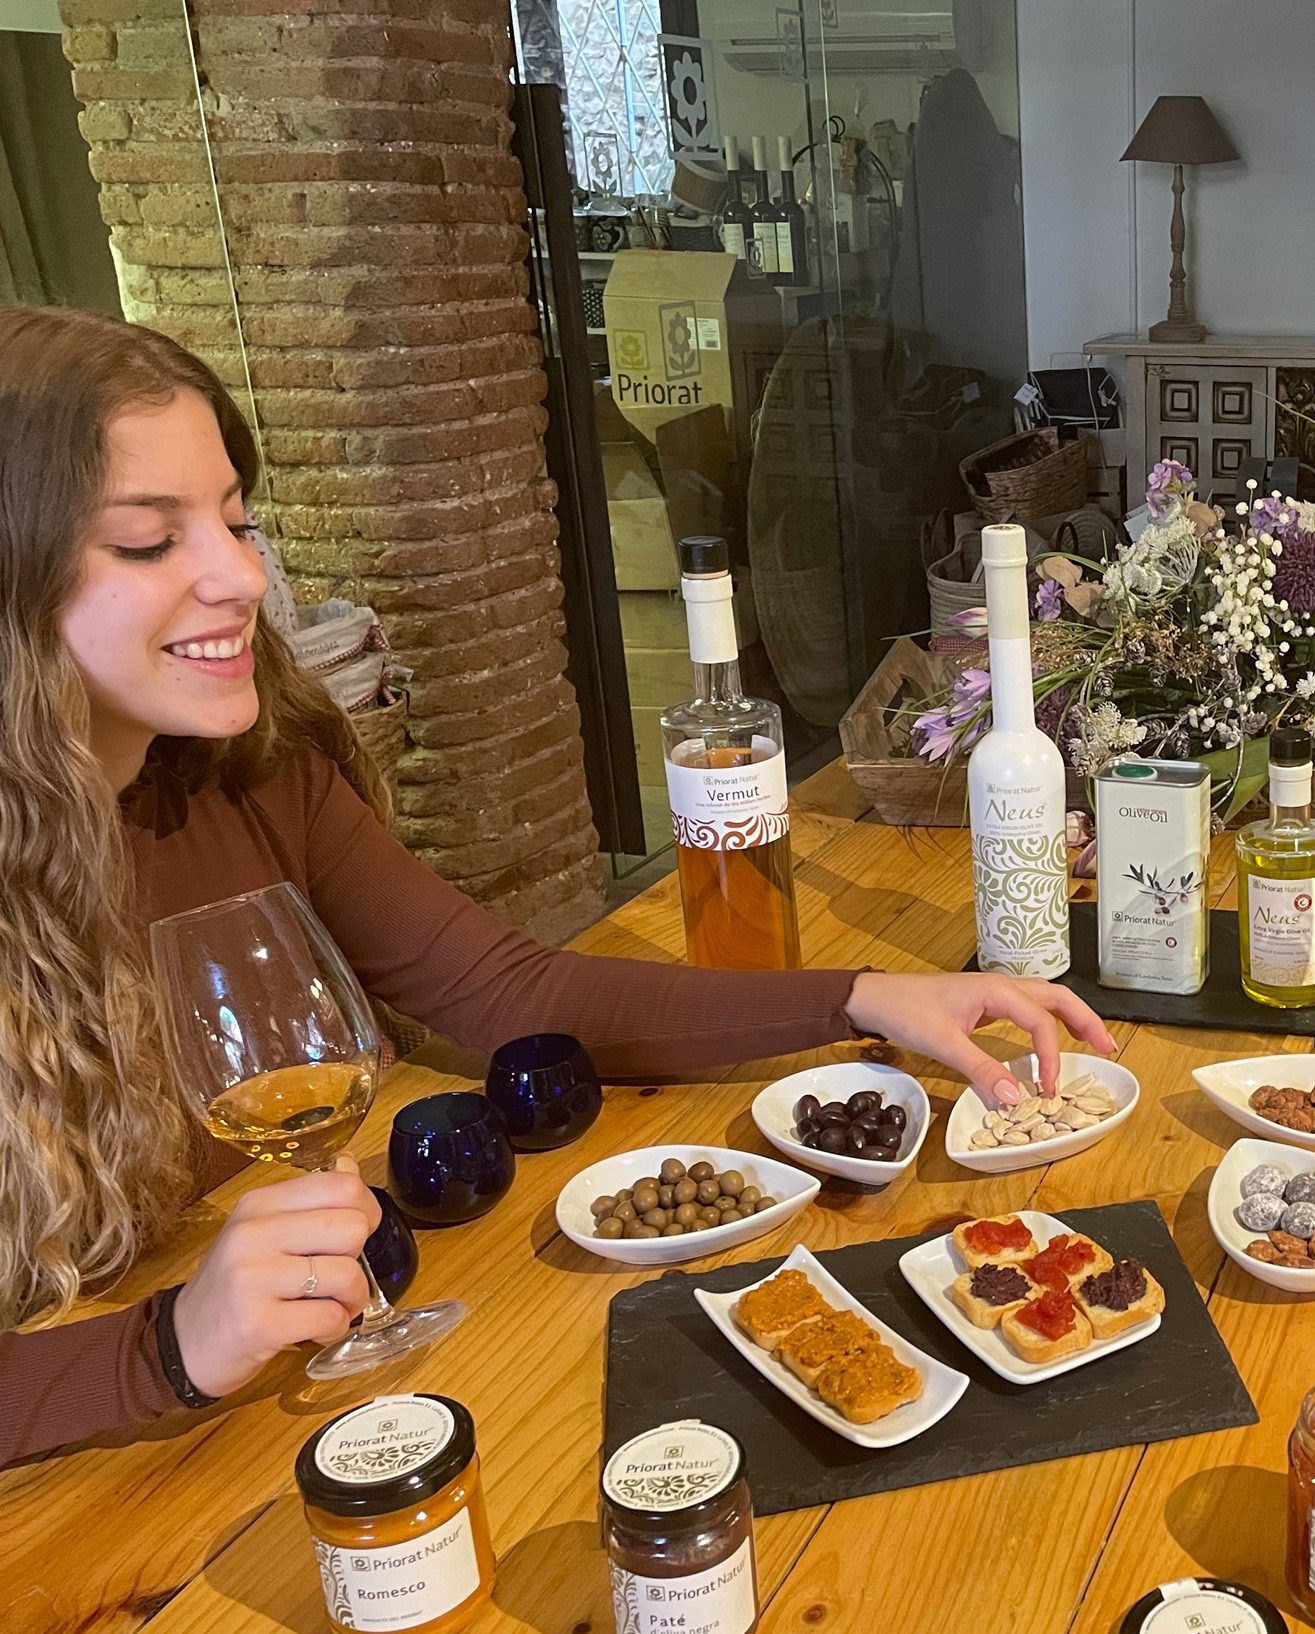 The Priorat tradition: oil + vermouth